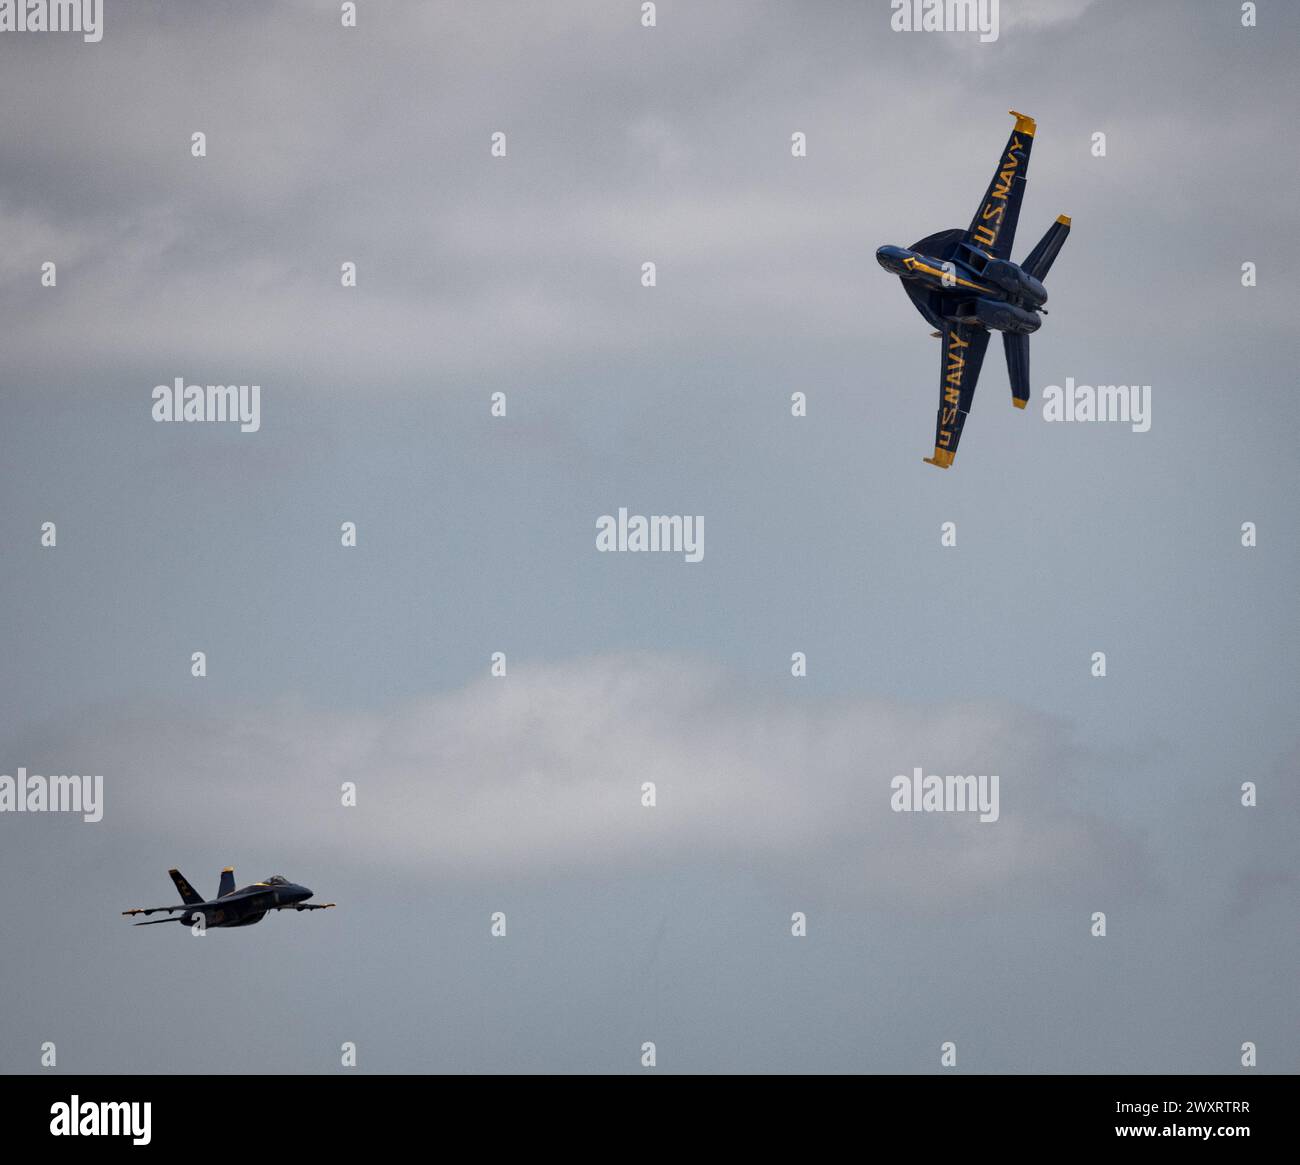 The United States Navy Blue Angel jets perform during a demonstration while flying in formation Stock Photo